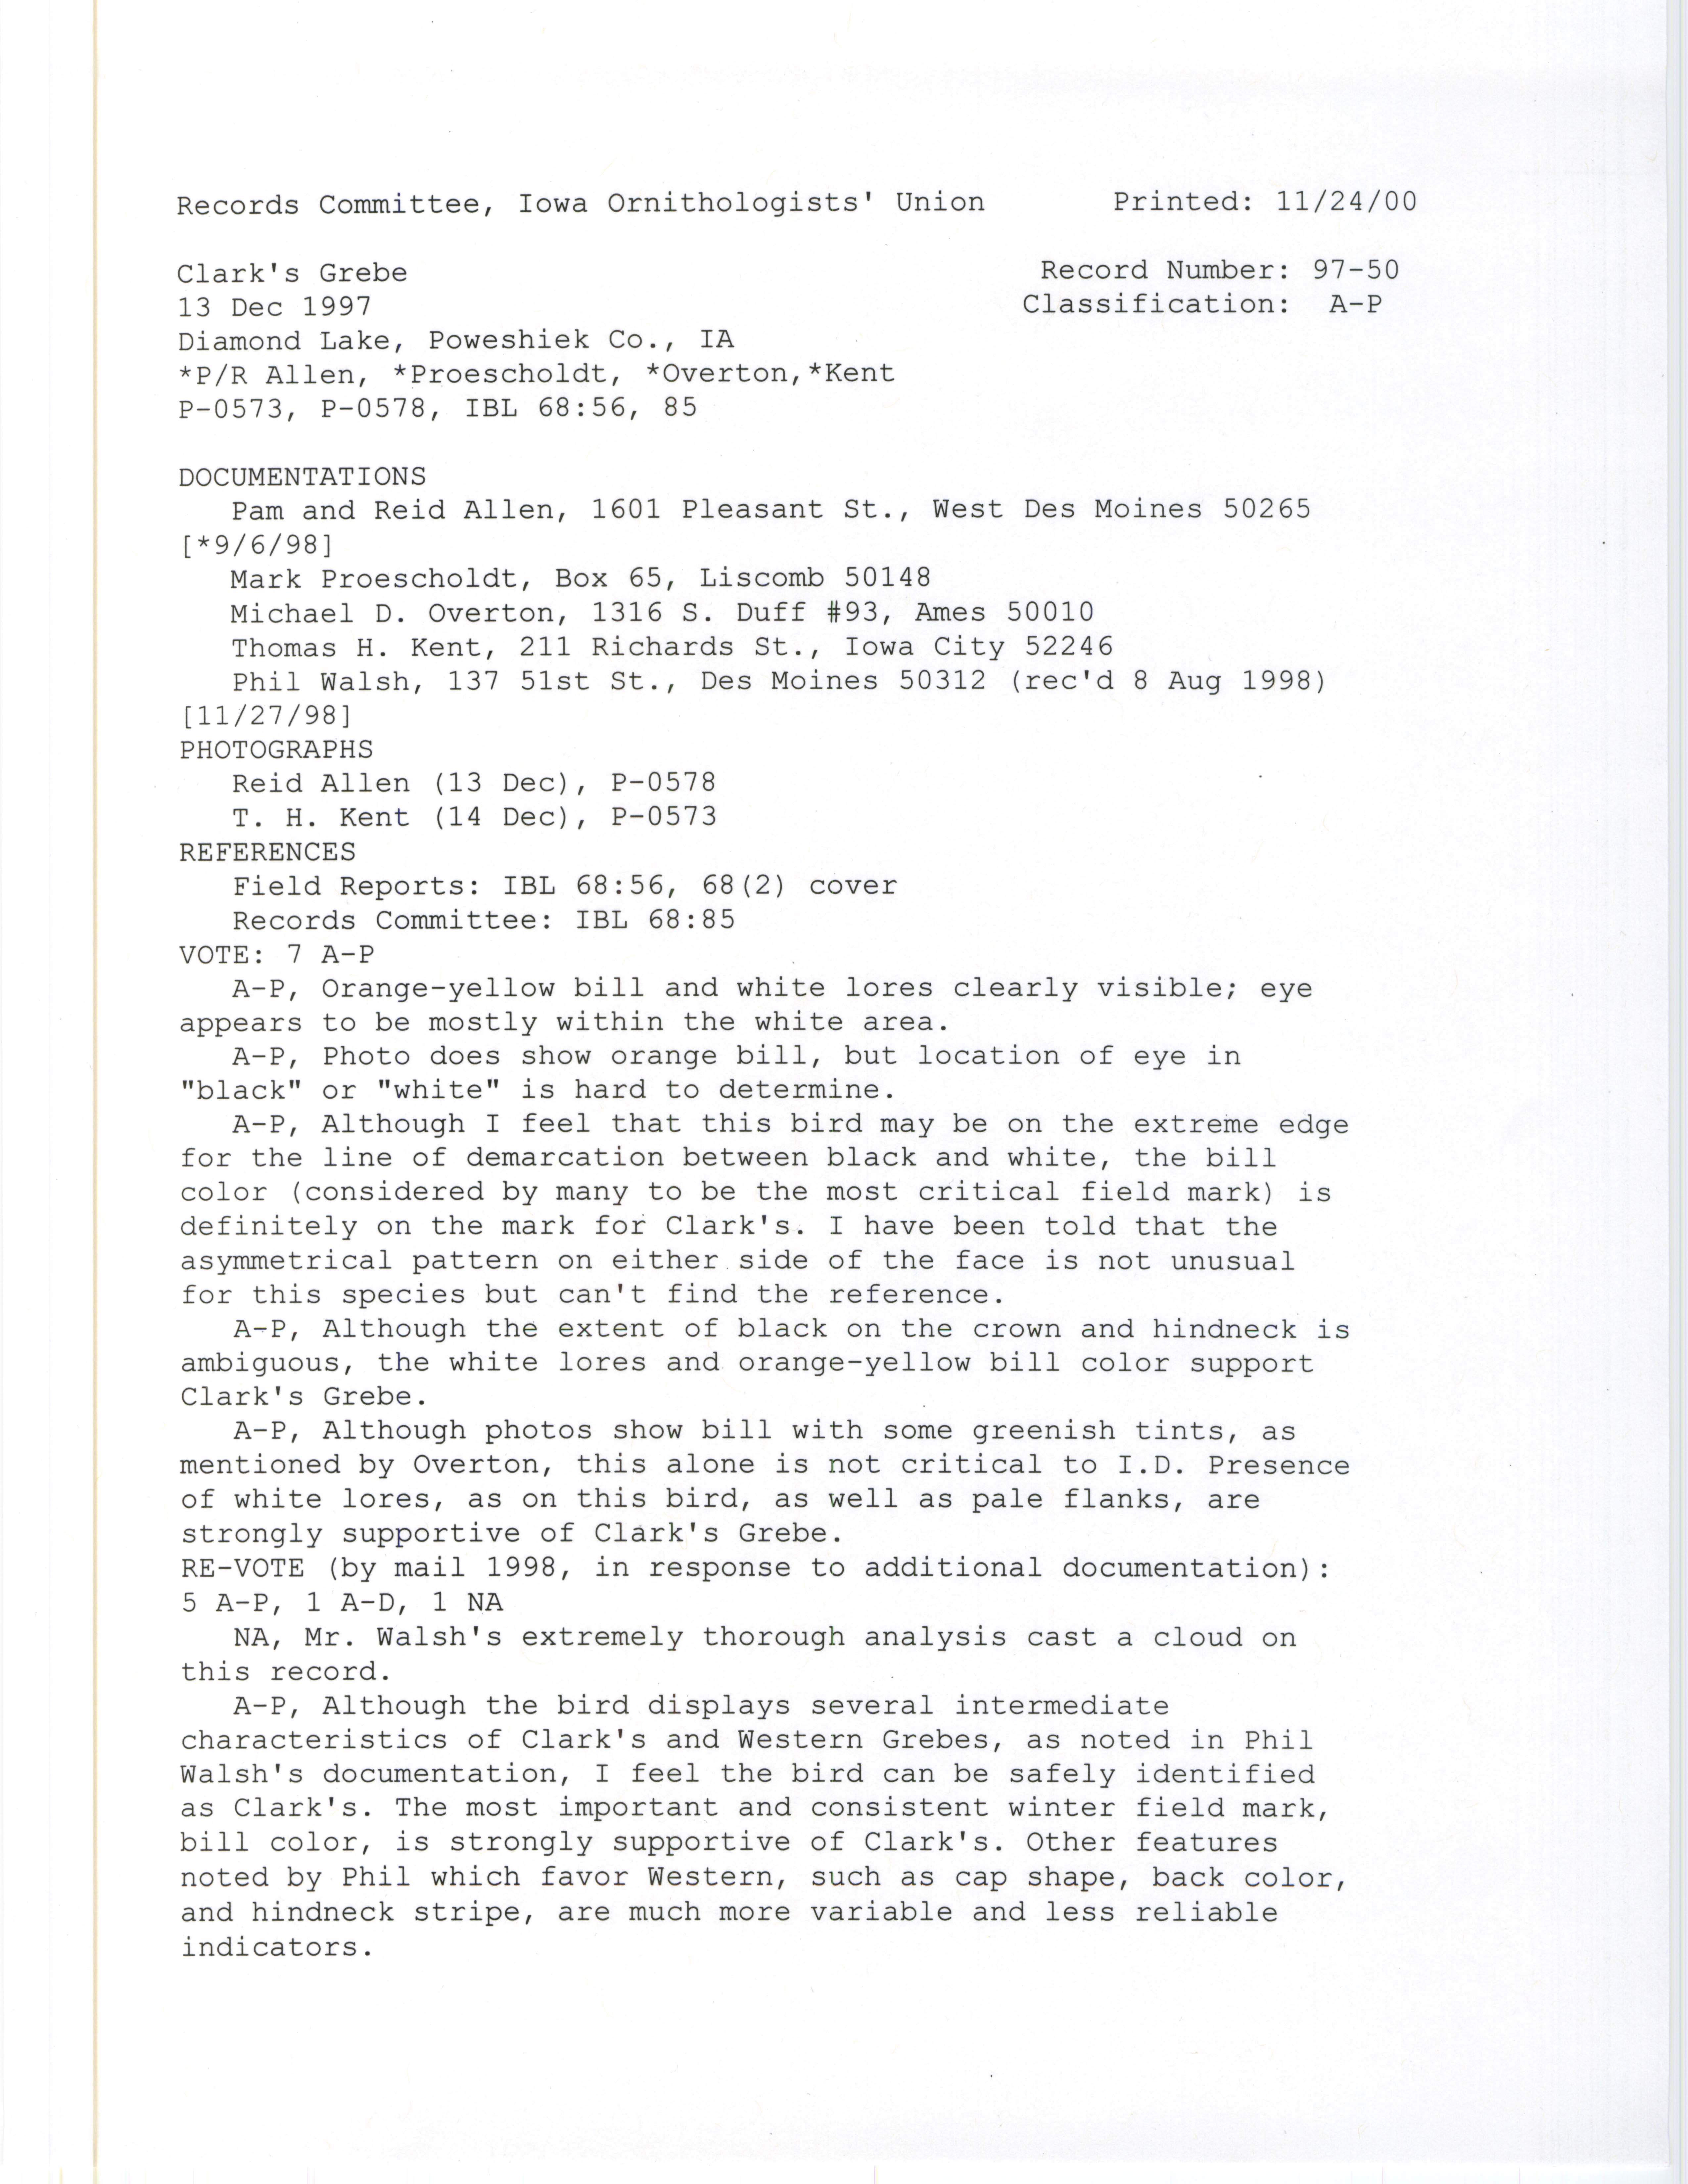 Records Committee review for rare bird sighting of Clark's Grebe at Diamond Lake, 1997